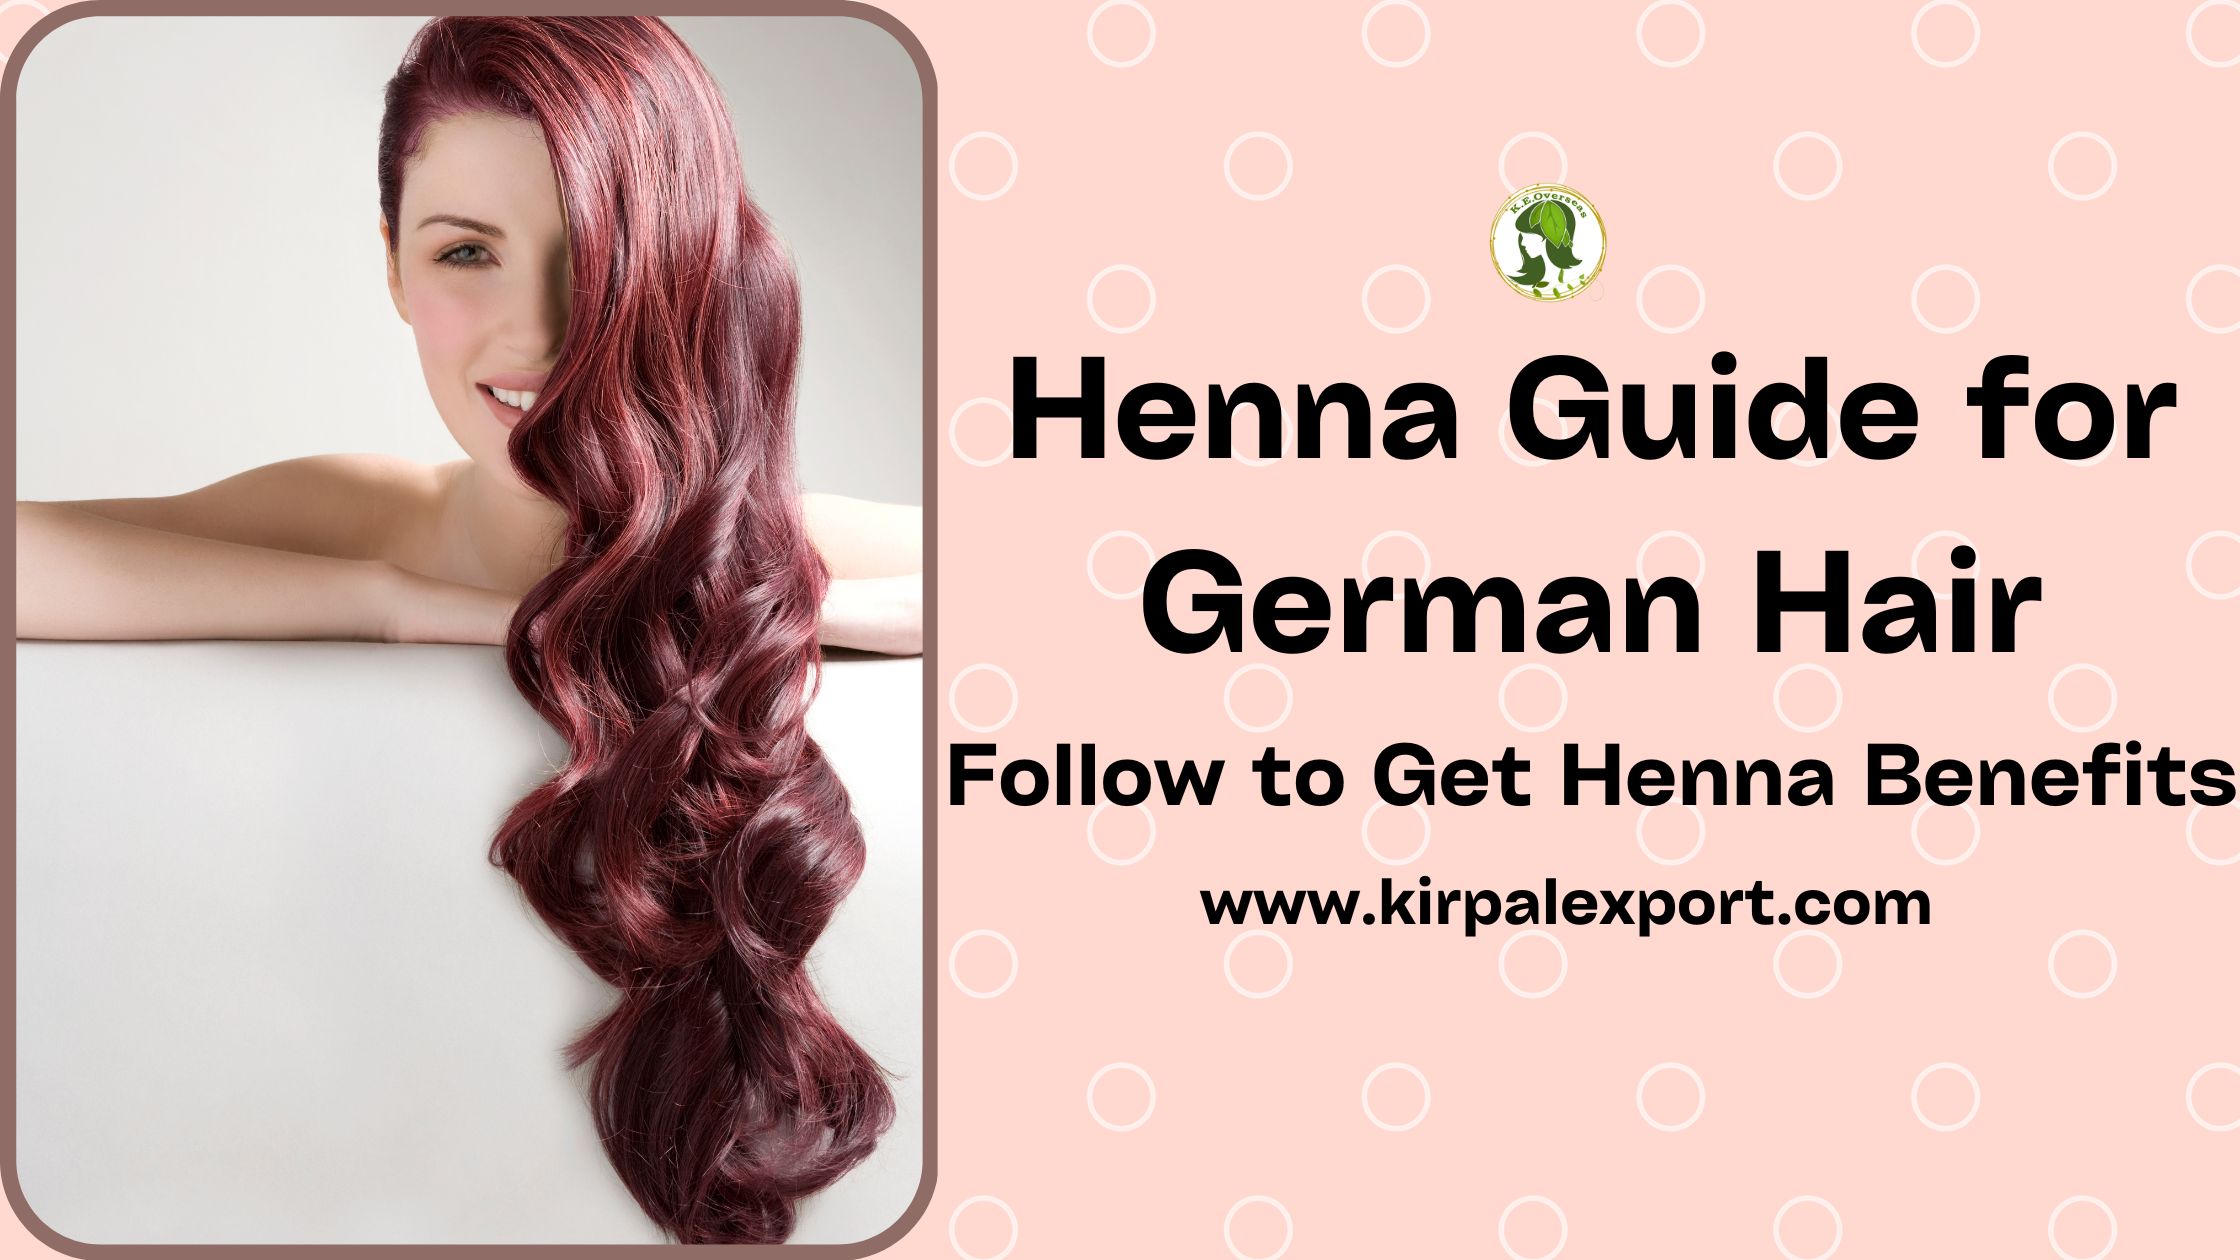 Henna Guide for German Hair